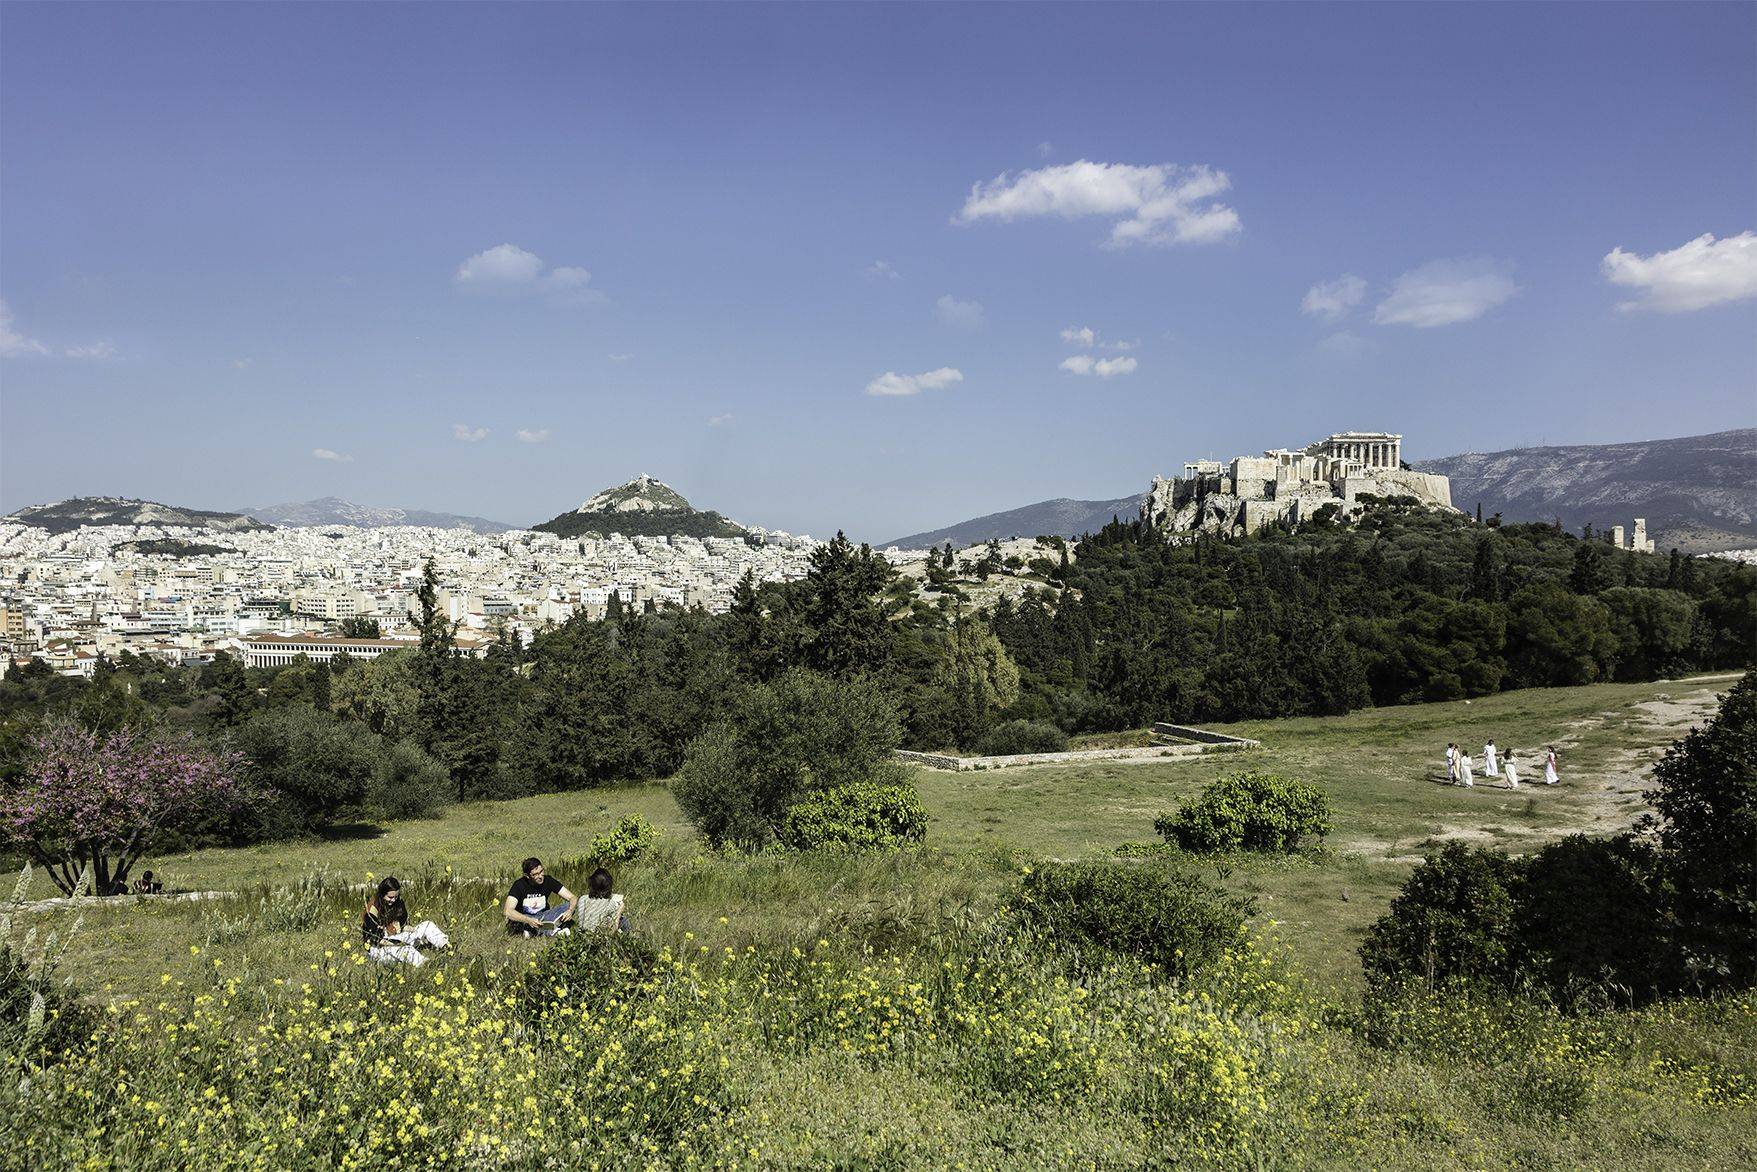 At the Intersection of Past and Future 1. CYA Students on the Pnyx. The Acropolis of Athens and Lycabettus hill are visible in the background